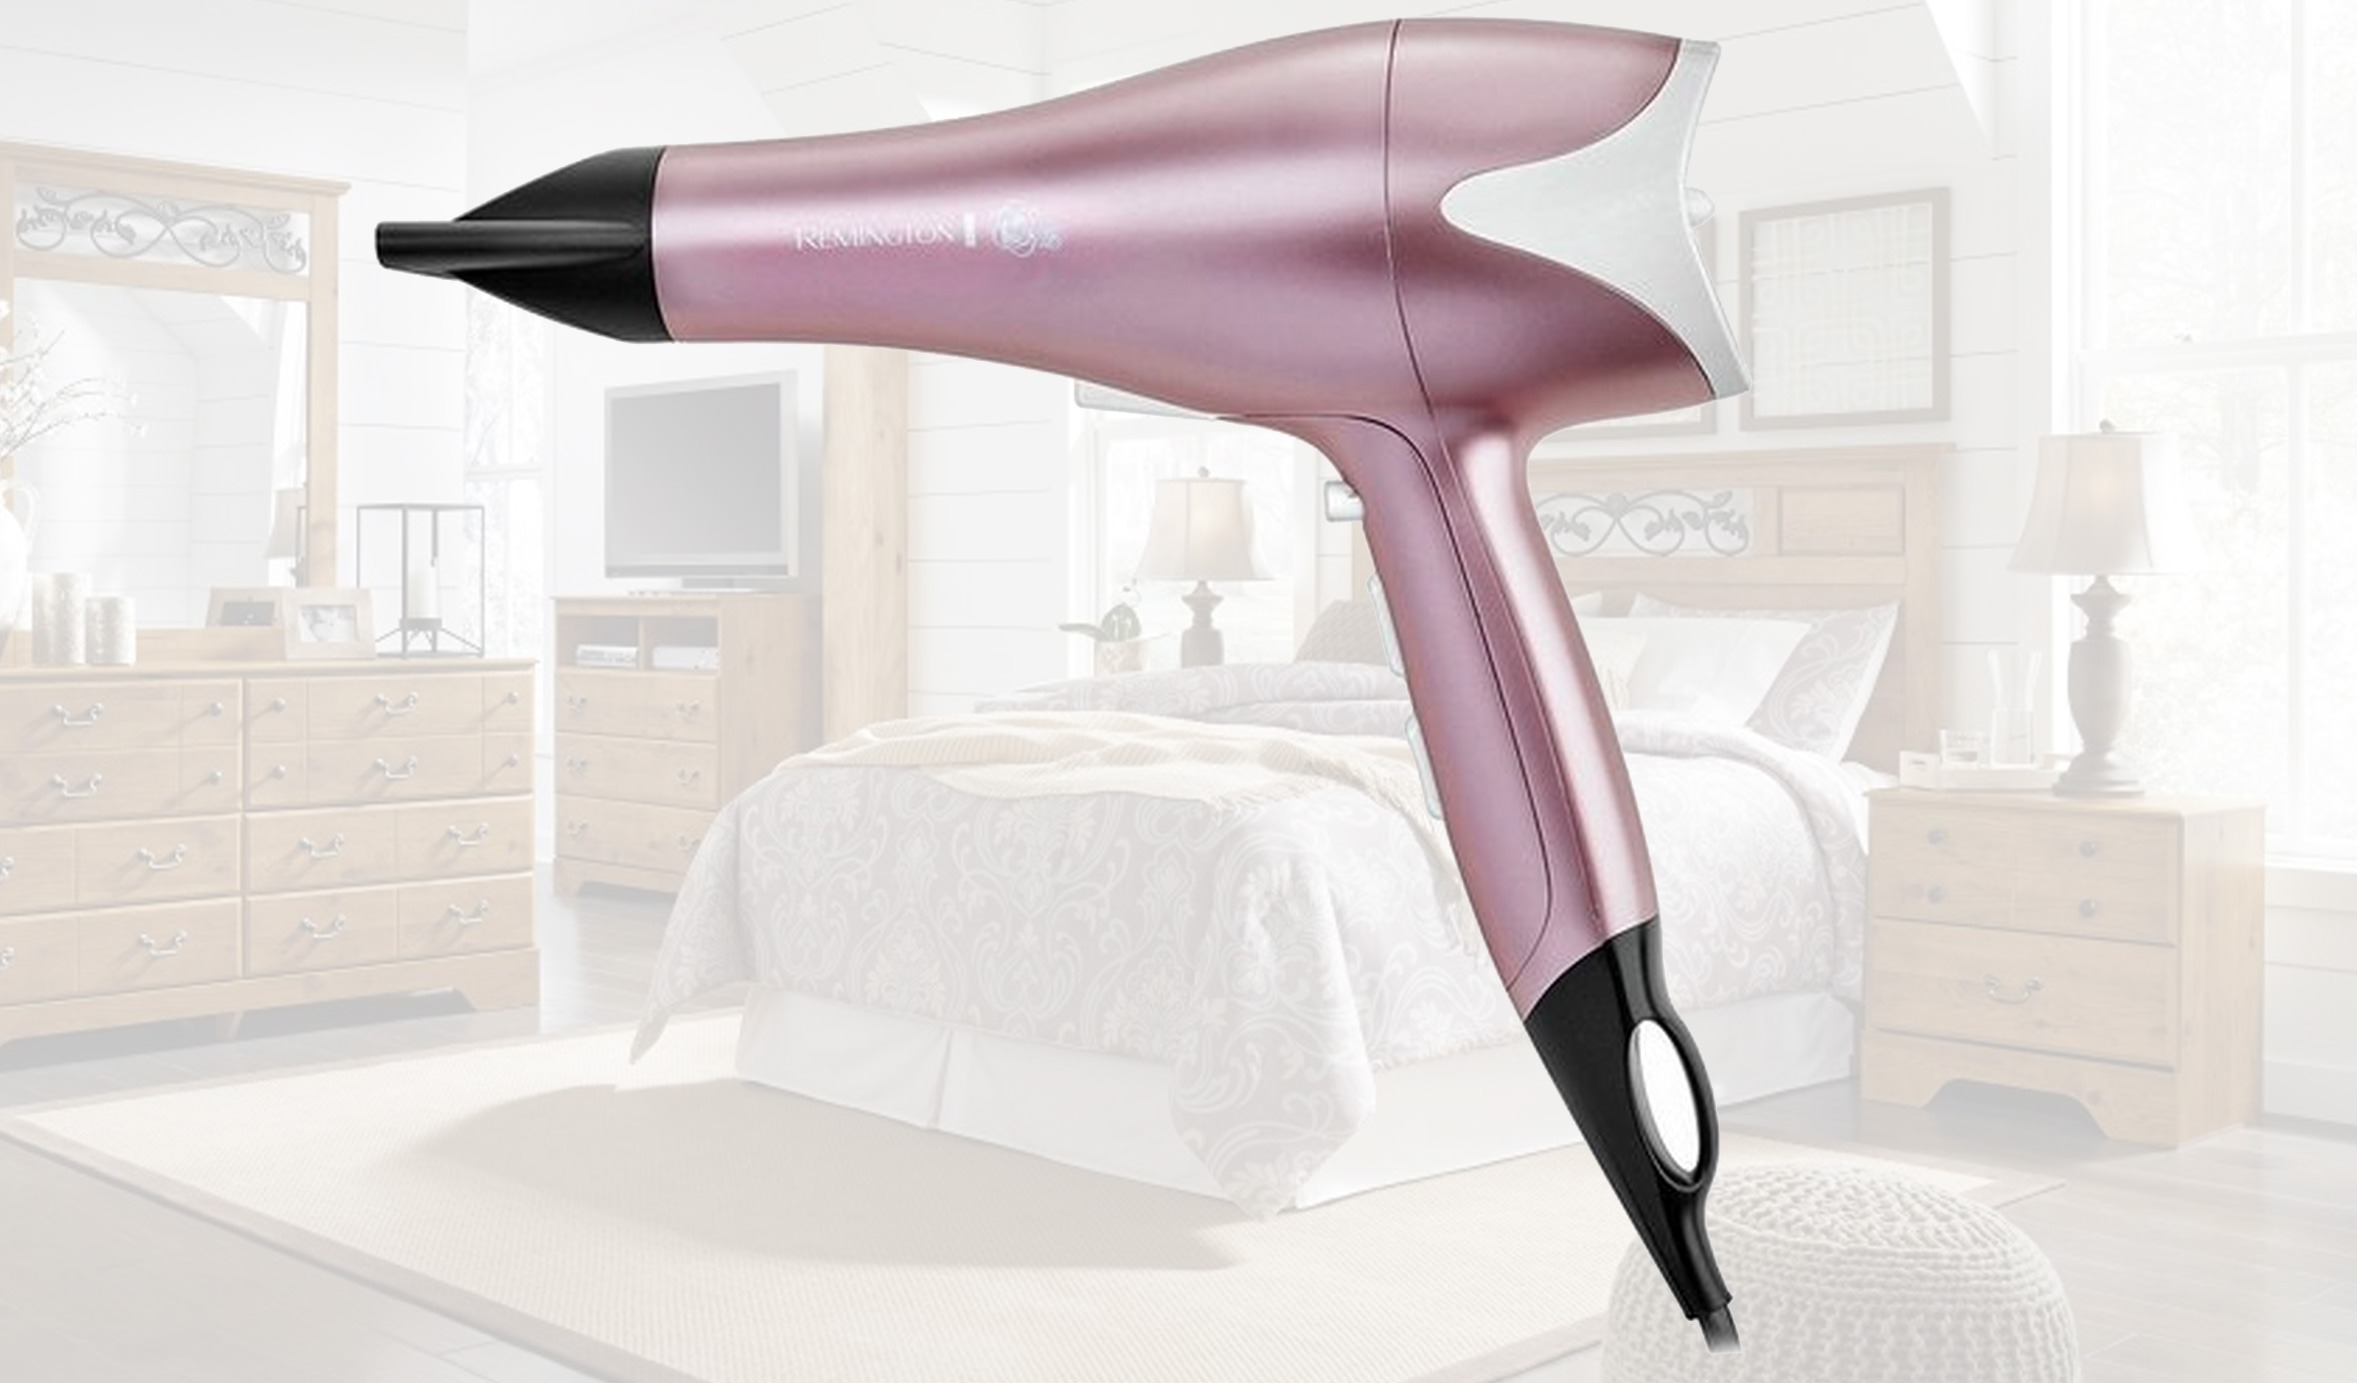 Remington Rose Pearl Hair Dryer with Diffuser AC5095 Review | ReviewLive